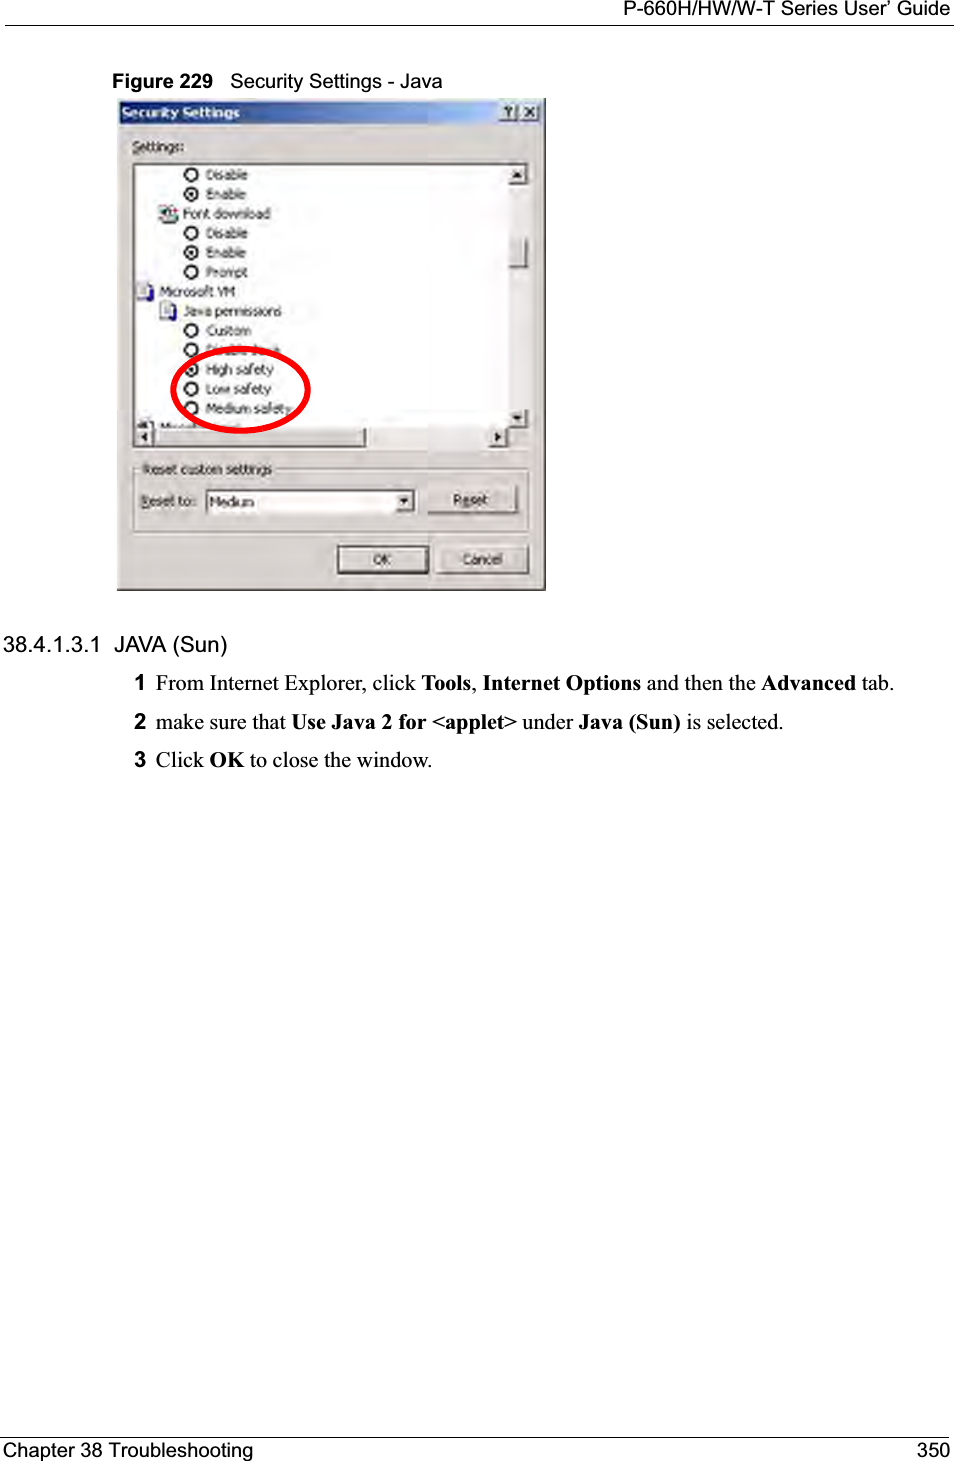 P-660H/HW/W-T Series User’ GuideChapter 38 Troubleshooting 350Figure 229   Security Settings - Java 38.4.1.3.1  JAVA (Sun)1From Internet Explorer, click Tools,Internet Options and then the Advanced tab. 2make sure that Use Java 2 for &lt;applet&gt; under Java (Sun) is selected.3Click OK to close the window.